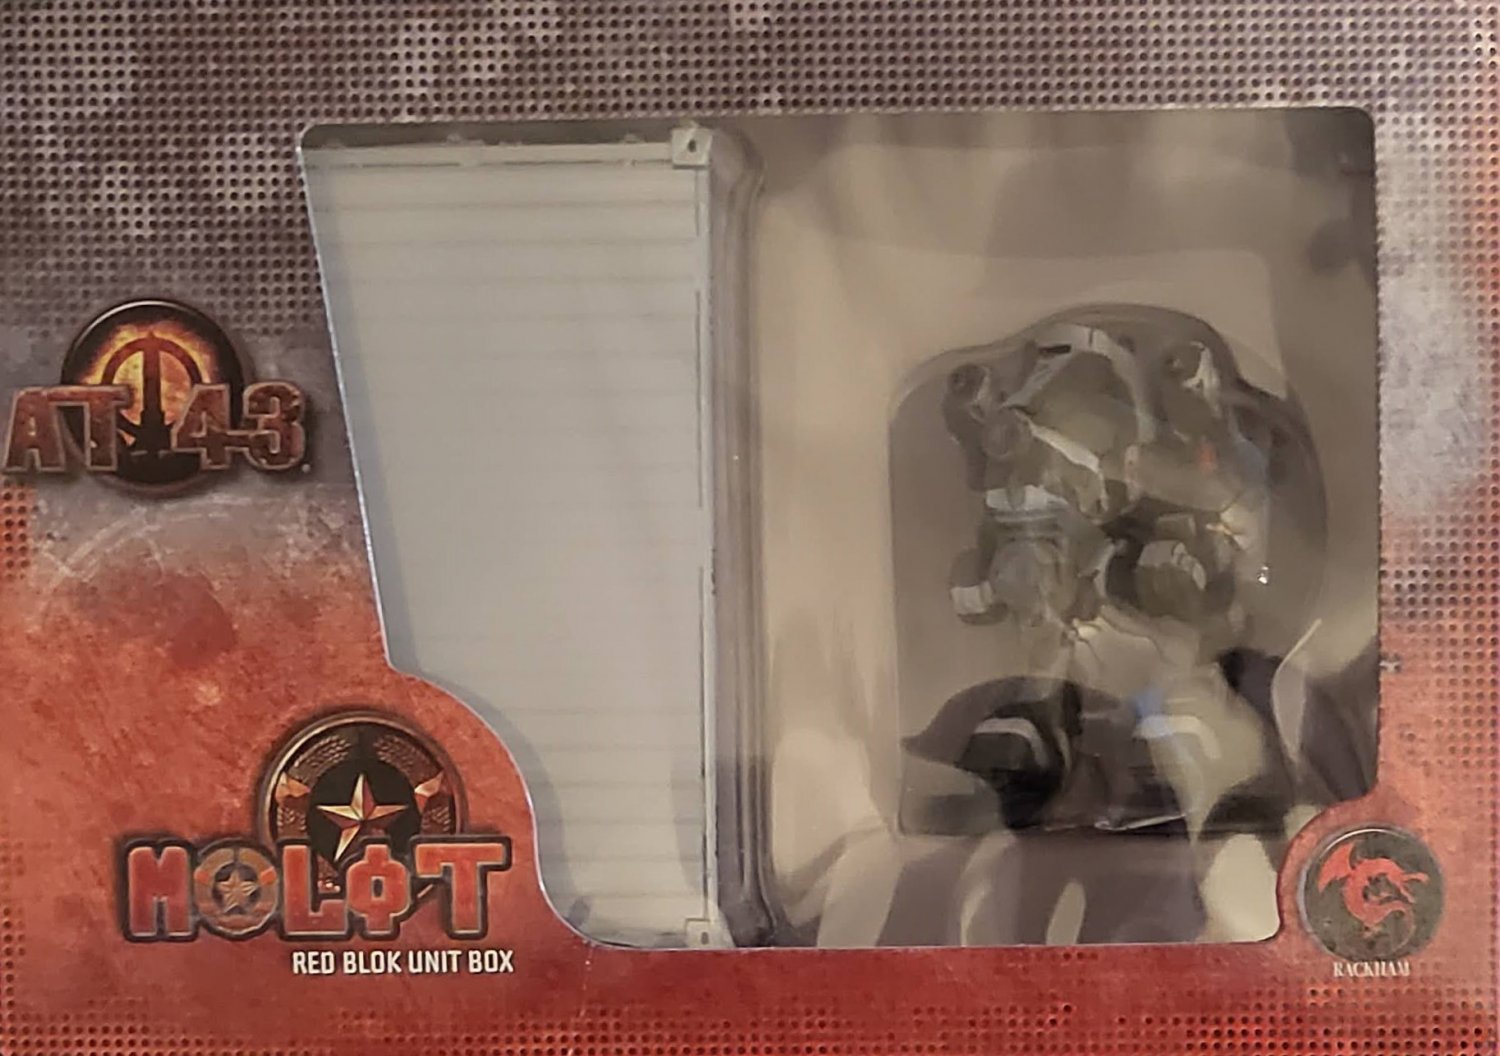 AT-43 Therians Wraith Golgoth Red Version OPEN BOX WITH CARDS RACKHAM